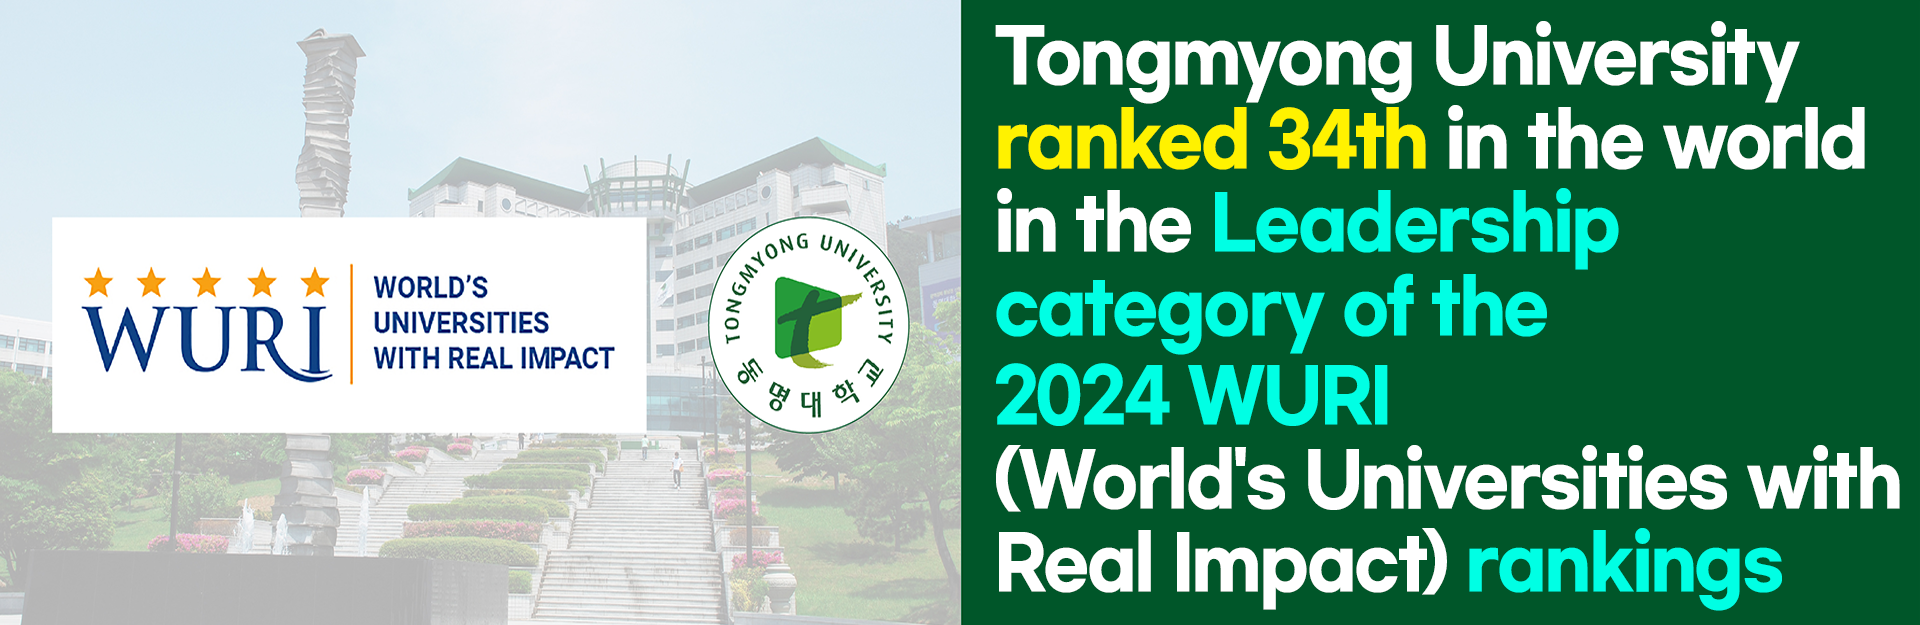 Tongmyong University ranked 34th in the world in the Leadership category of the 2024 WURI (World's Universities with Real Impact) rankings